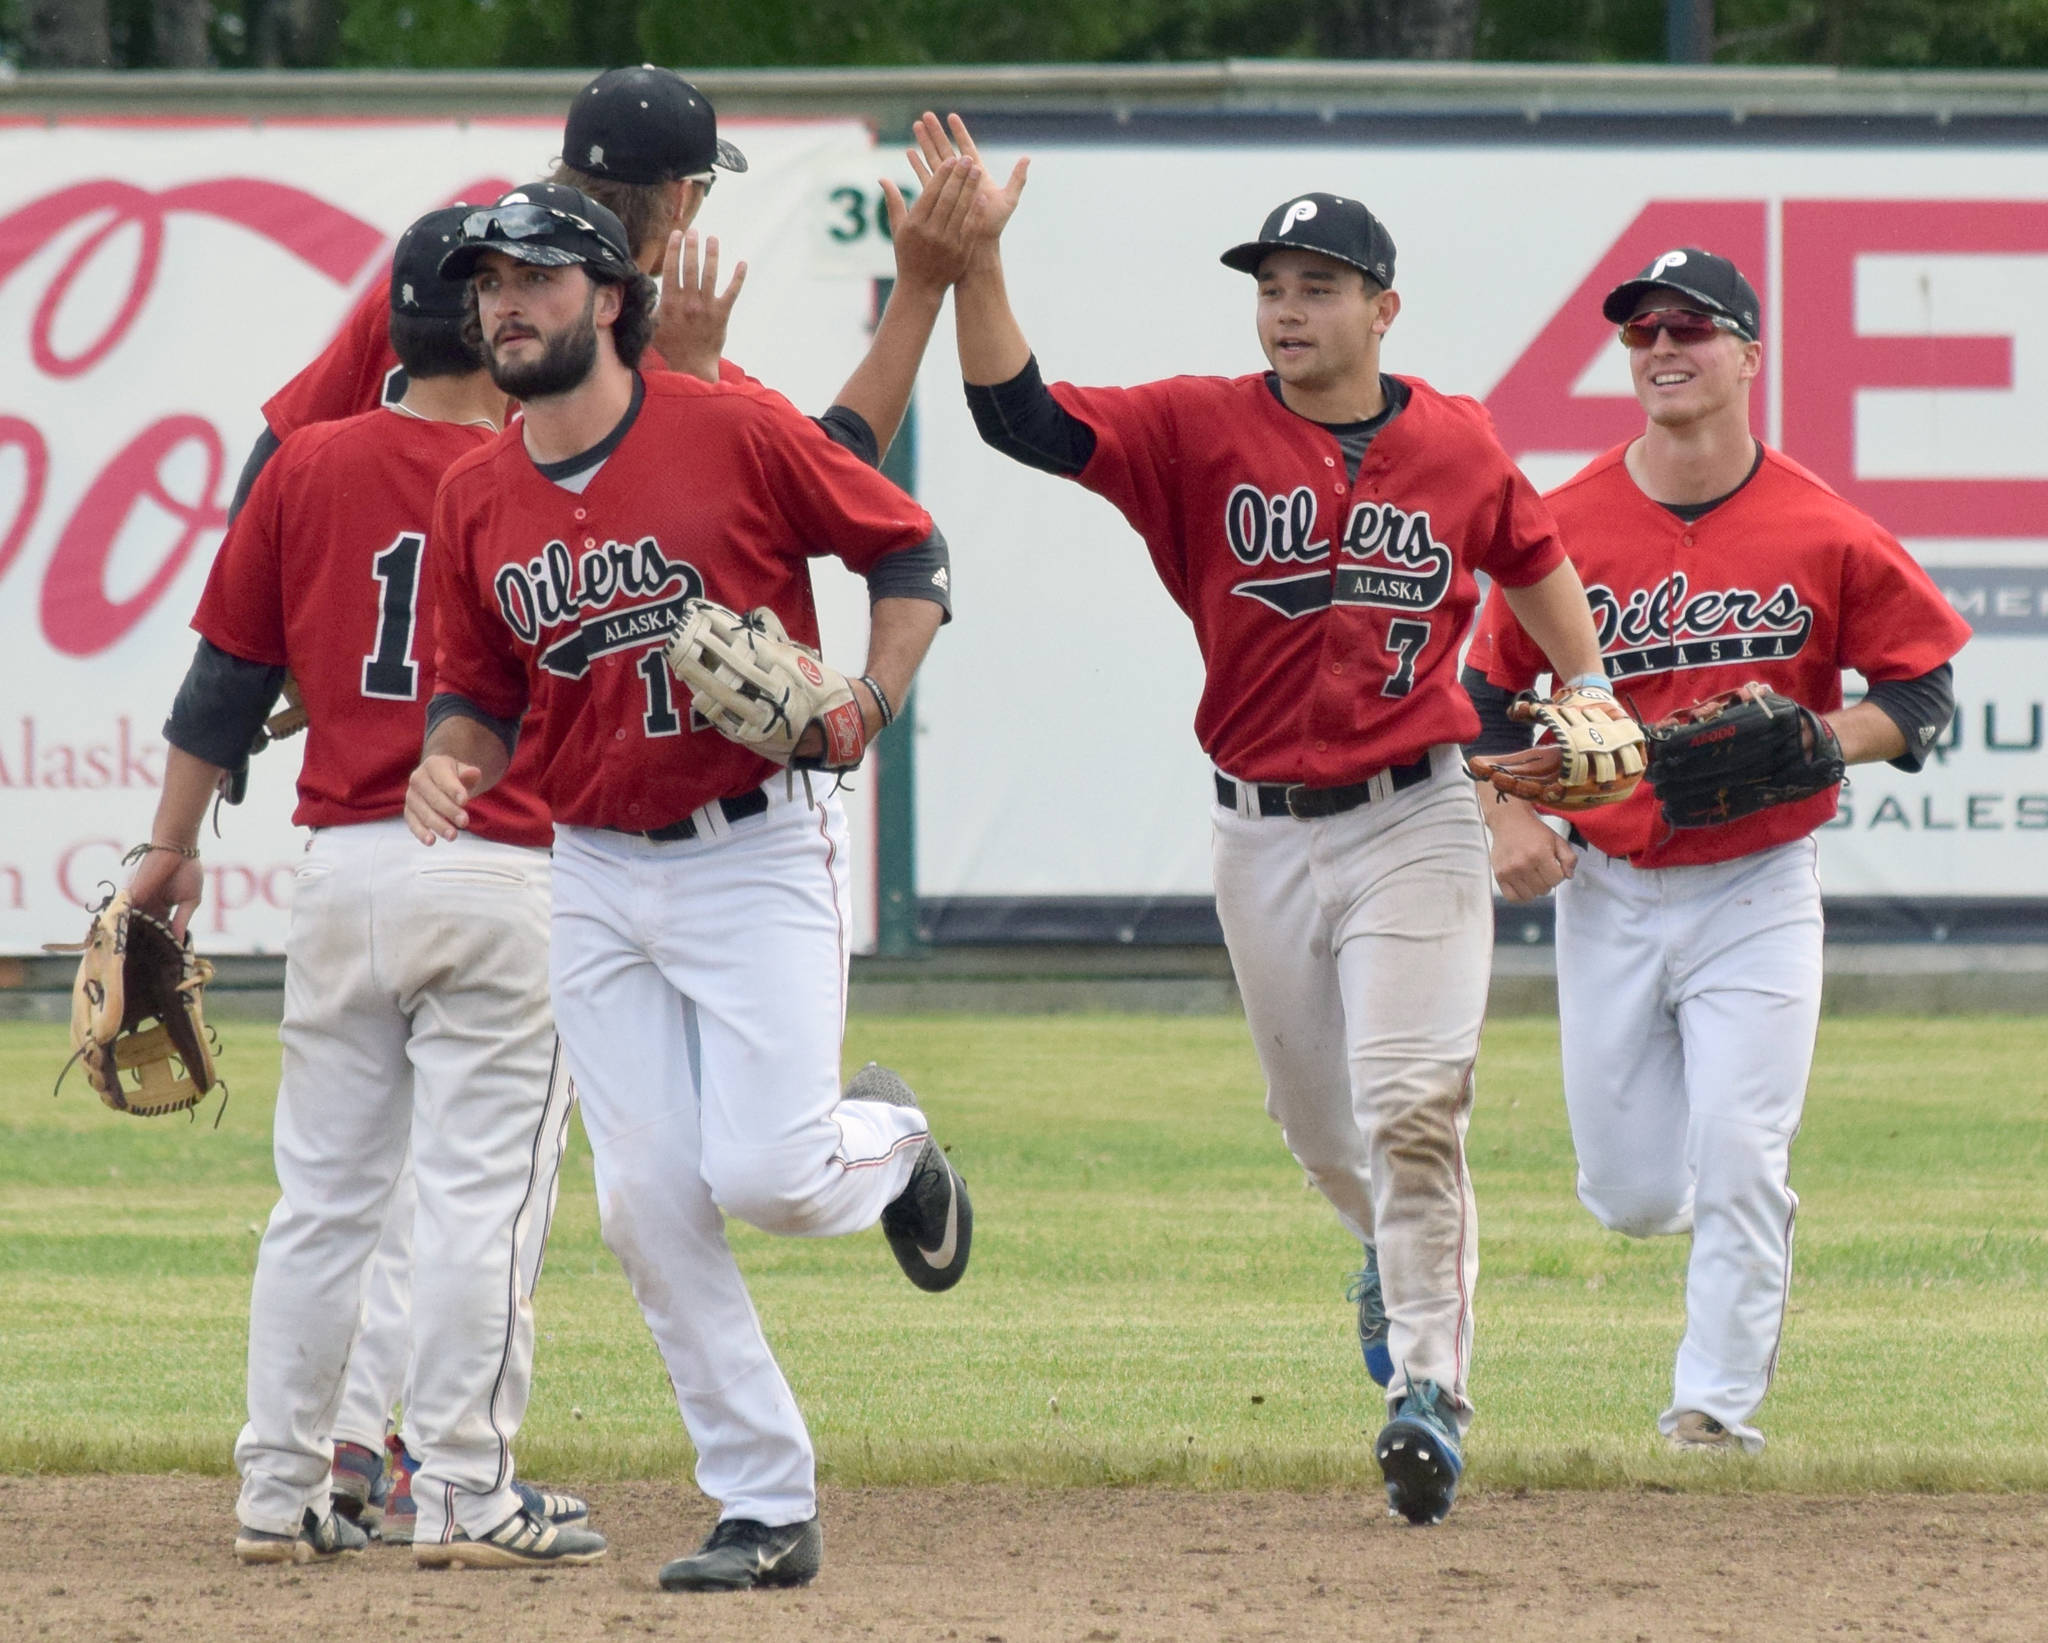 Oilers outfielders Calvin Farris, Camden Vasquez and Paul Steffensen receive congratulations after the Oilers defeated the Chugiak-Eagle River Chinooks on Sunday, June 16, 2019, at Coral Seymour Memorial Park in Kenai, Alaska.